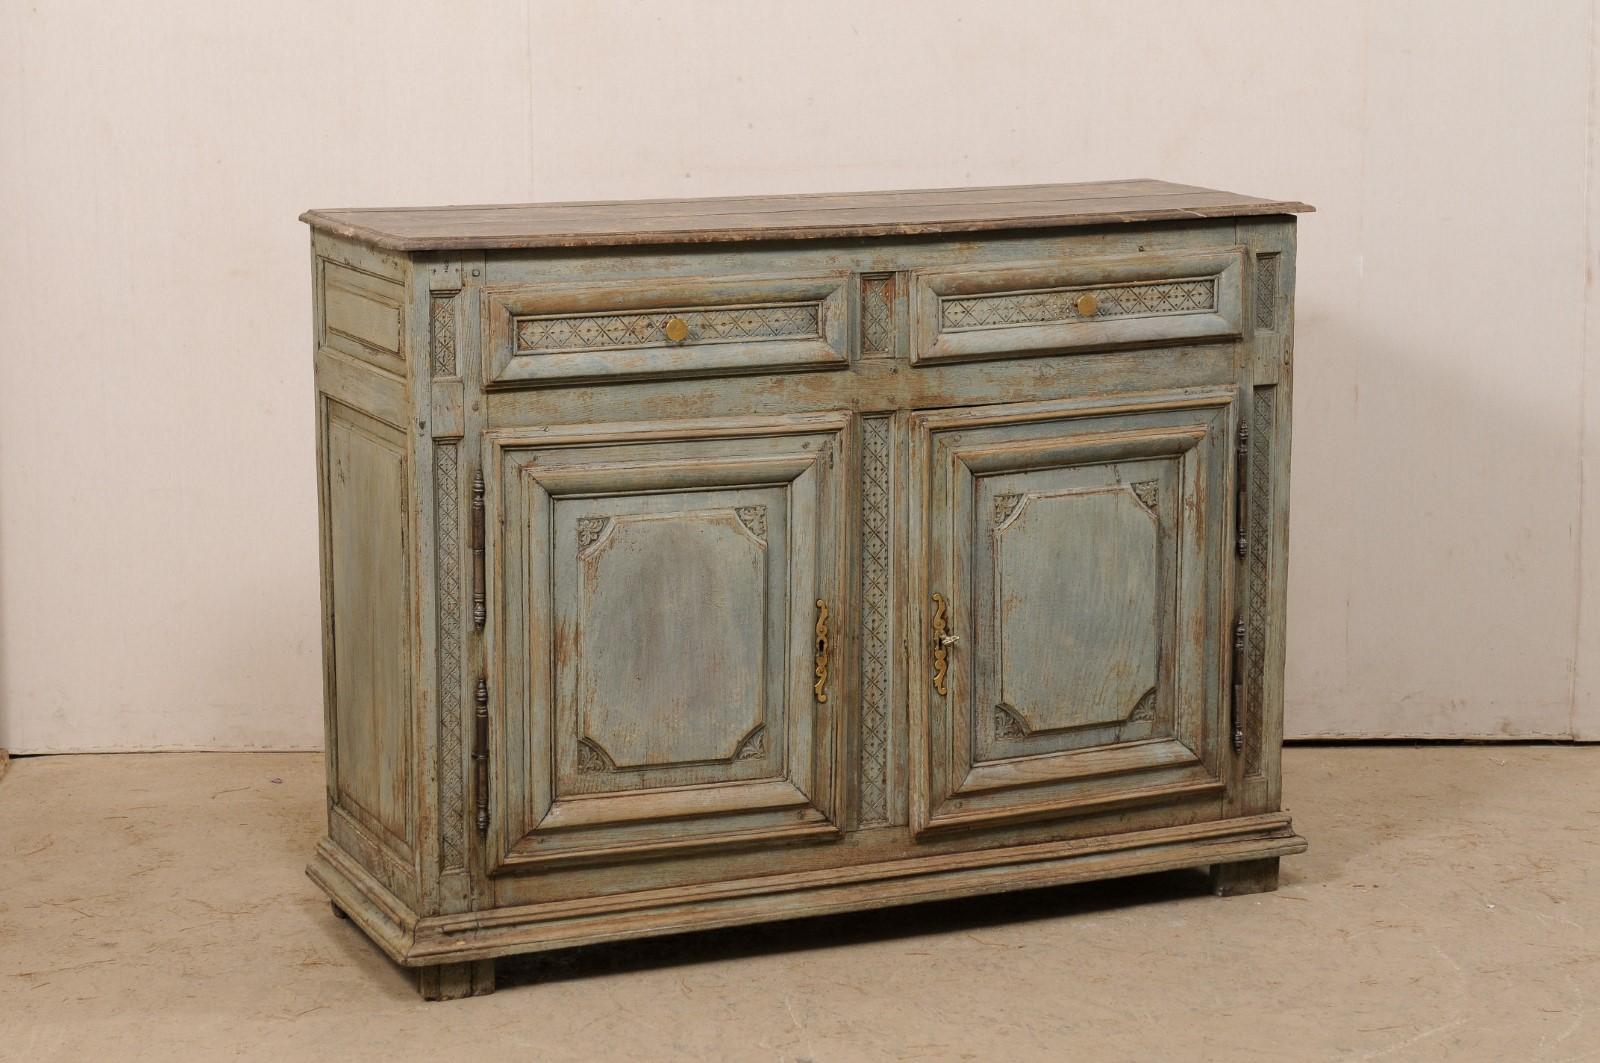 A French cabinet with faux marble painted top from the early 19th century. This antique buffet from France features a slightly overhanging rectangular-shaped top (brown colored faux marble), above a case which houses a pair of recessed panel drawers